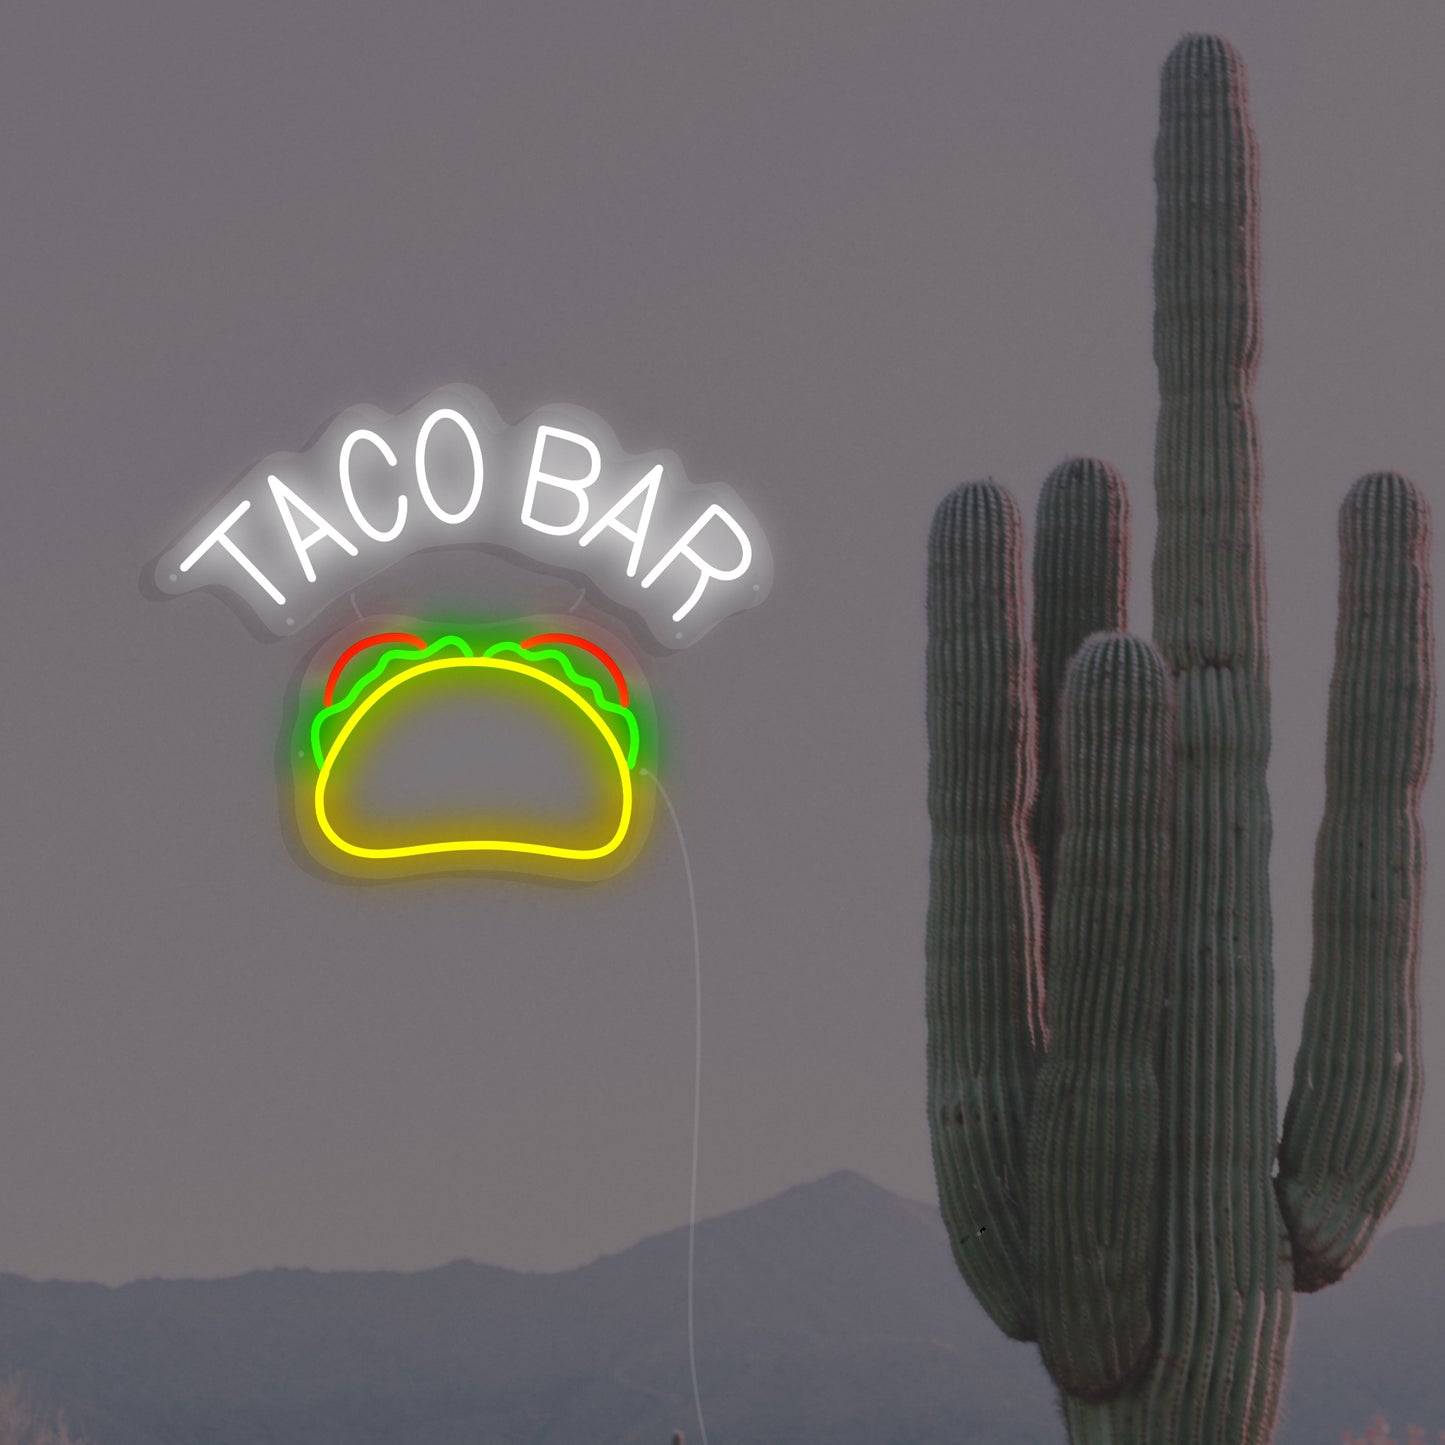 Taco bar sign as a neon sign showing a taco with tomato and lettuce leaves